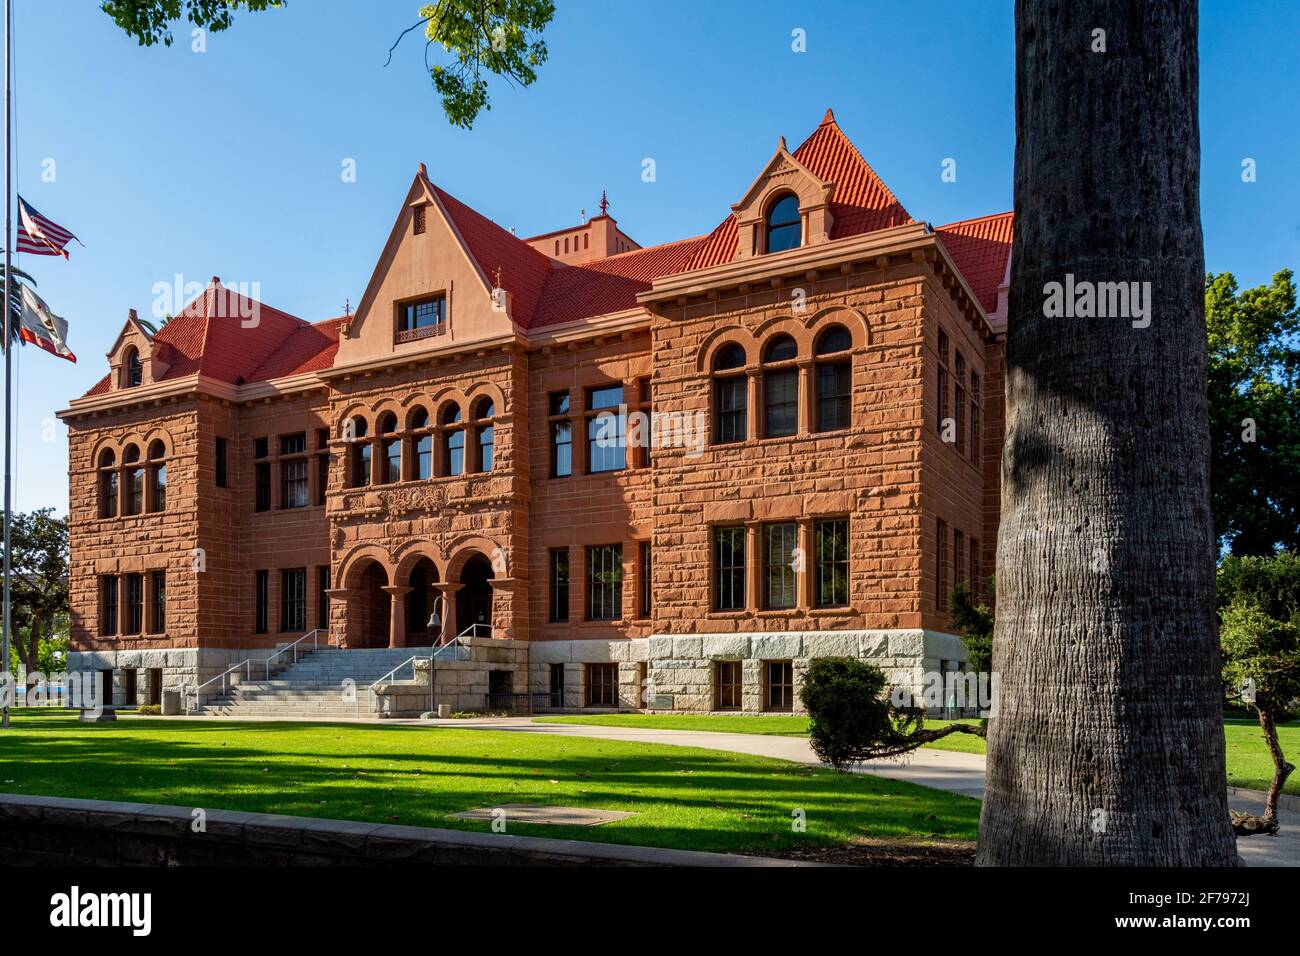 Old Orange County Courthouse, dedicated in 1901, is a granite and sandstone Romanesque Revival building in the Santa Ana Historical Downtown District. Stock Photo